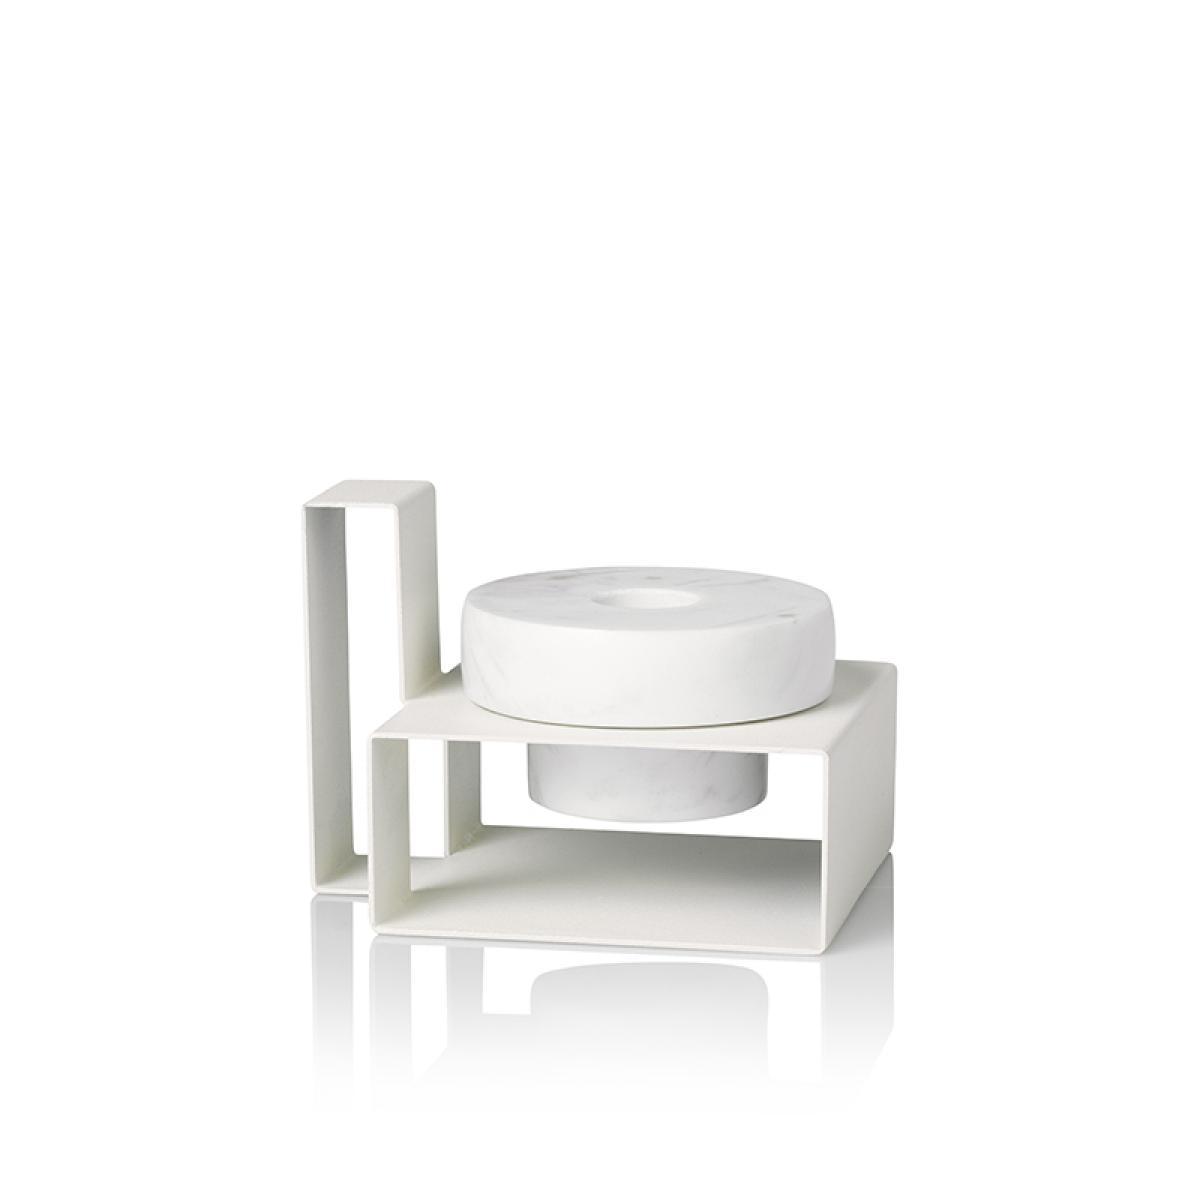 Lucie Kaas Marco Candlestick White，8厘米